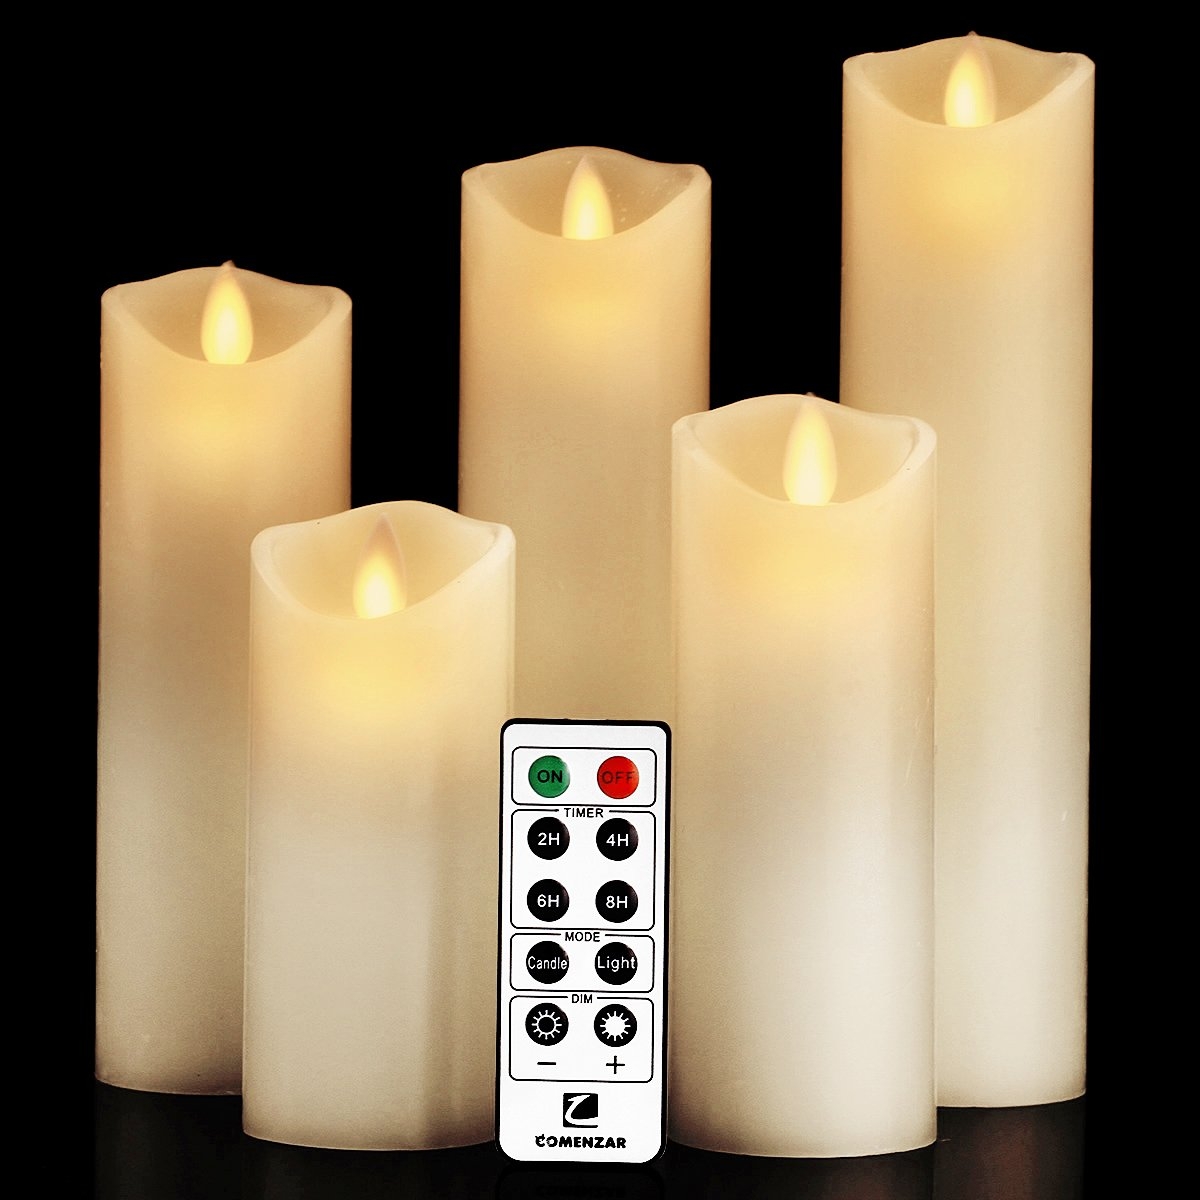 How Long Do Batteries Last In Flameless Candles